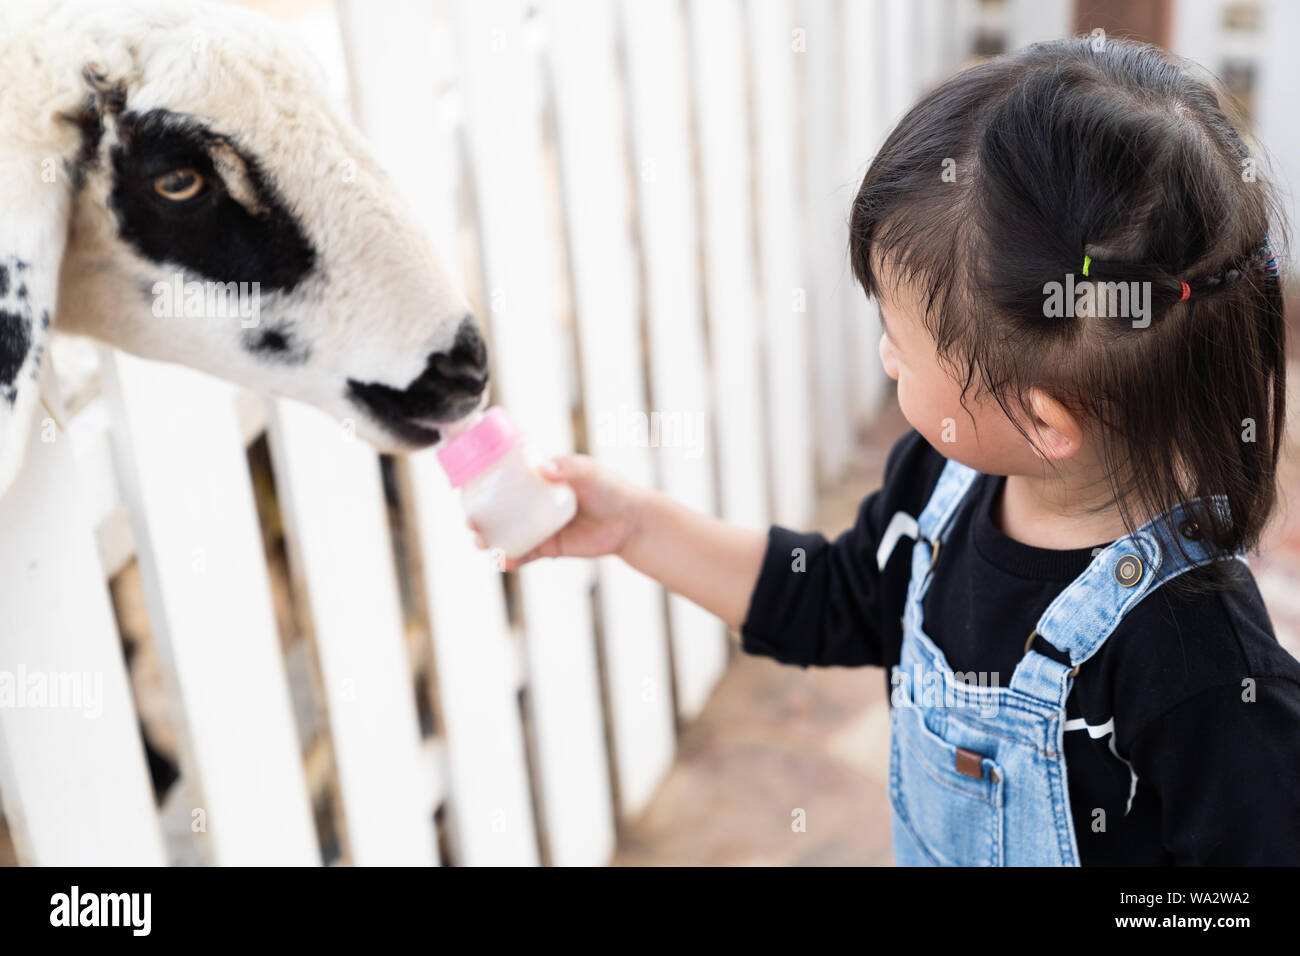 Asian cute girl feeding milk bottle for sheep in the farm, Activities family to enhance the learning experience of children. Stock Photo